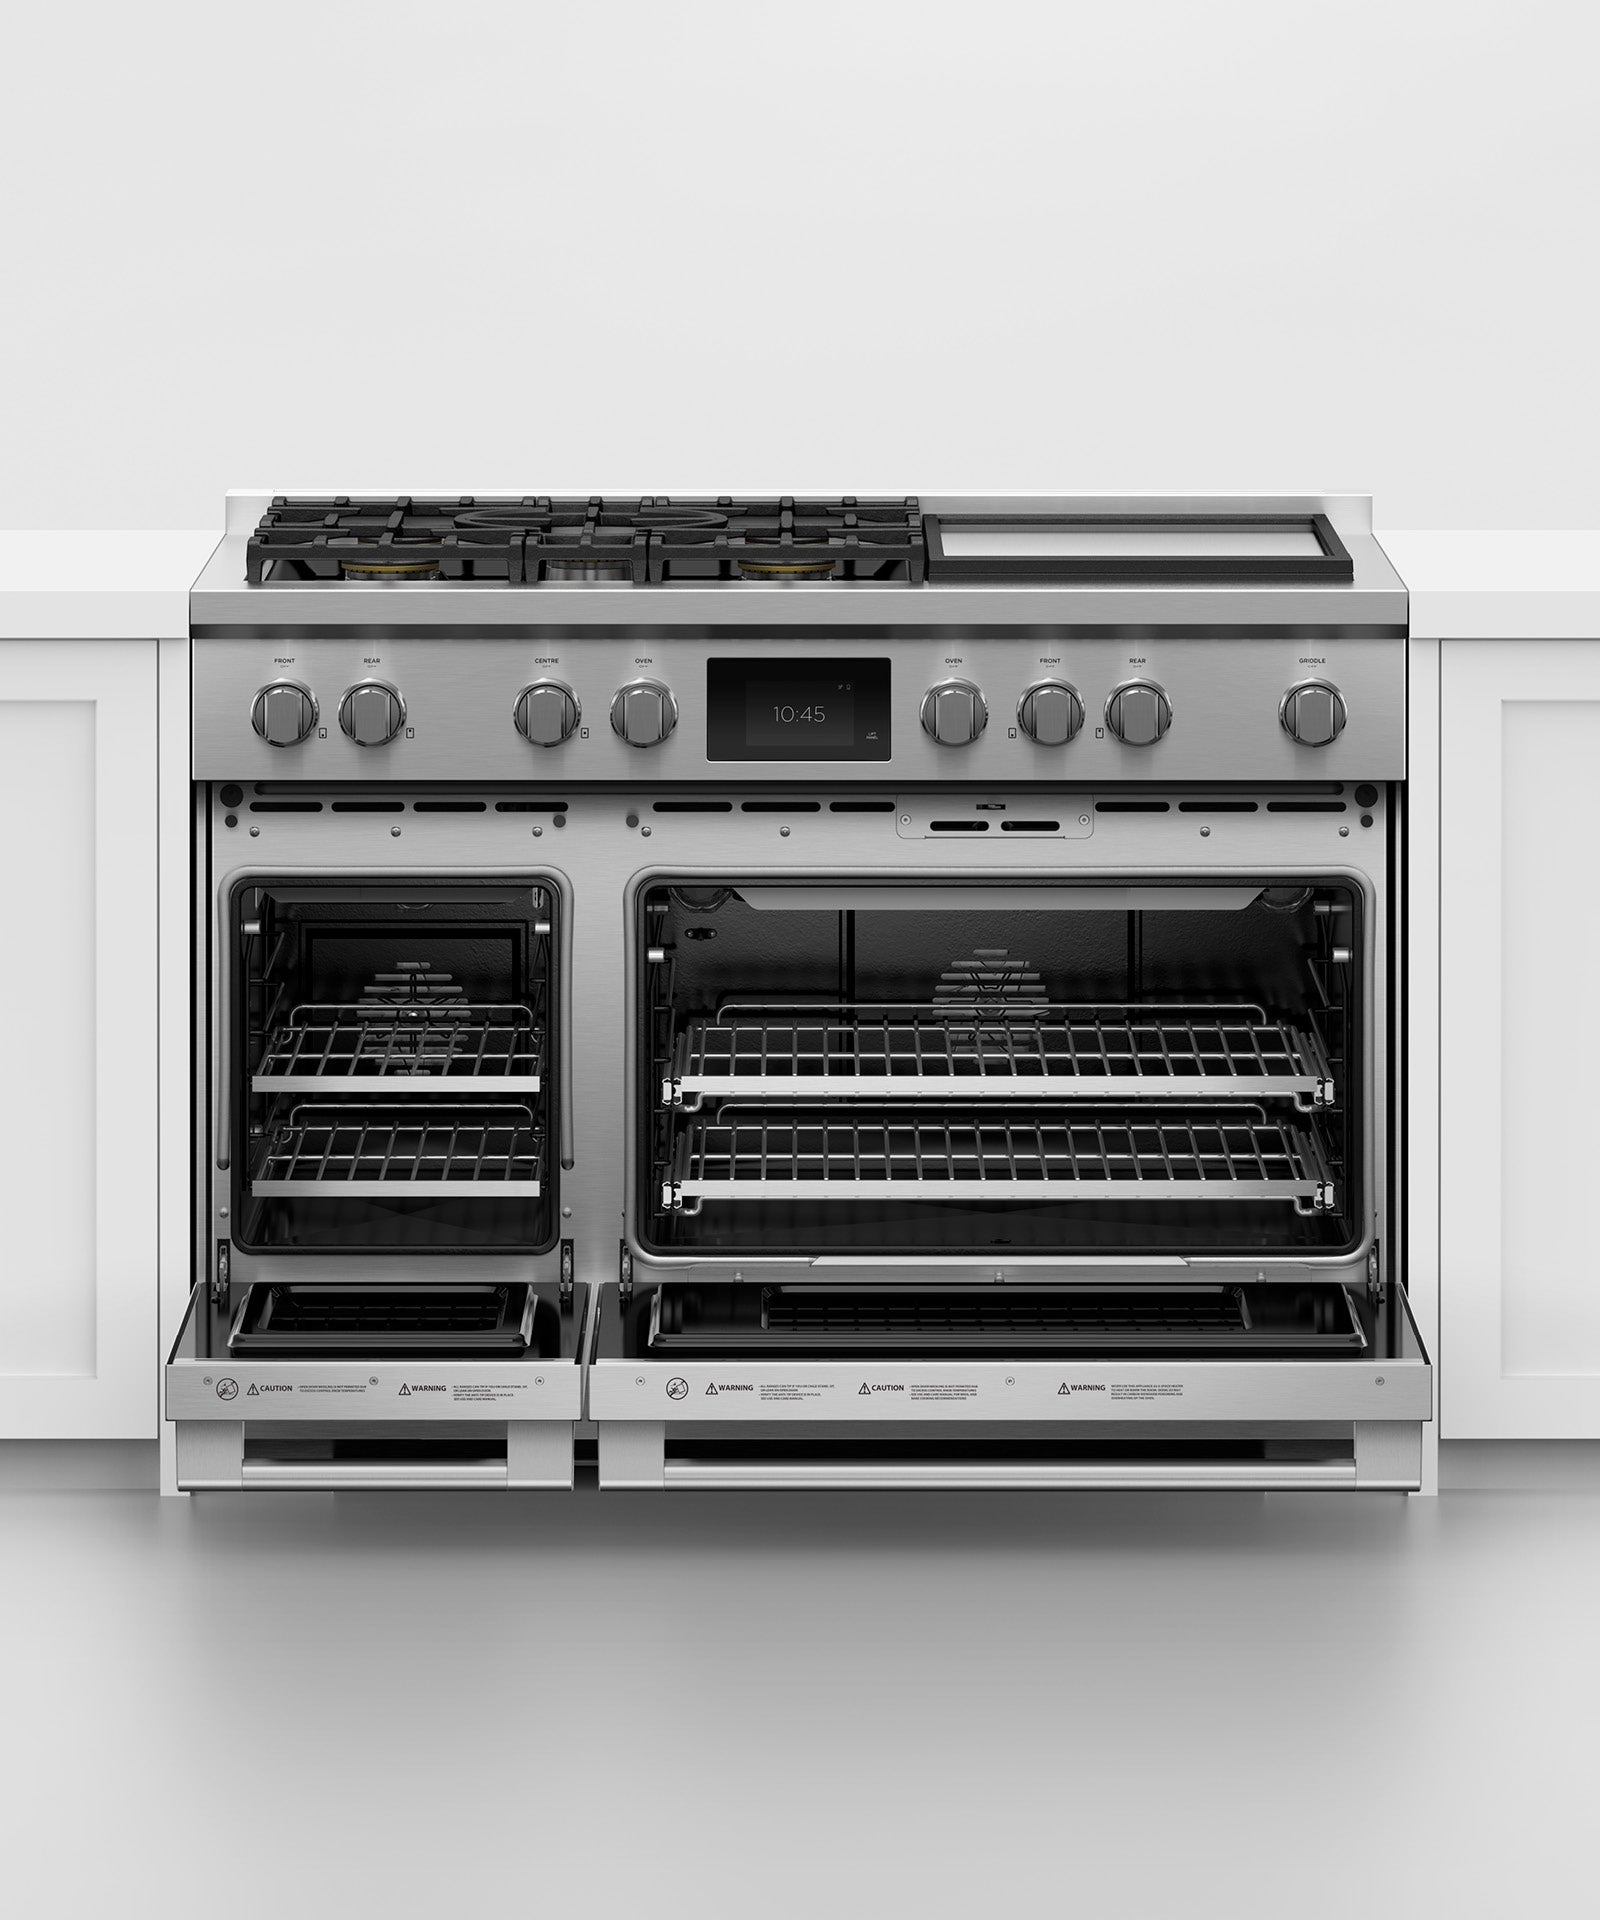 Dual Fuel Range, 48", 5 Burners with Griddle, Self-cleaning, pdp